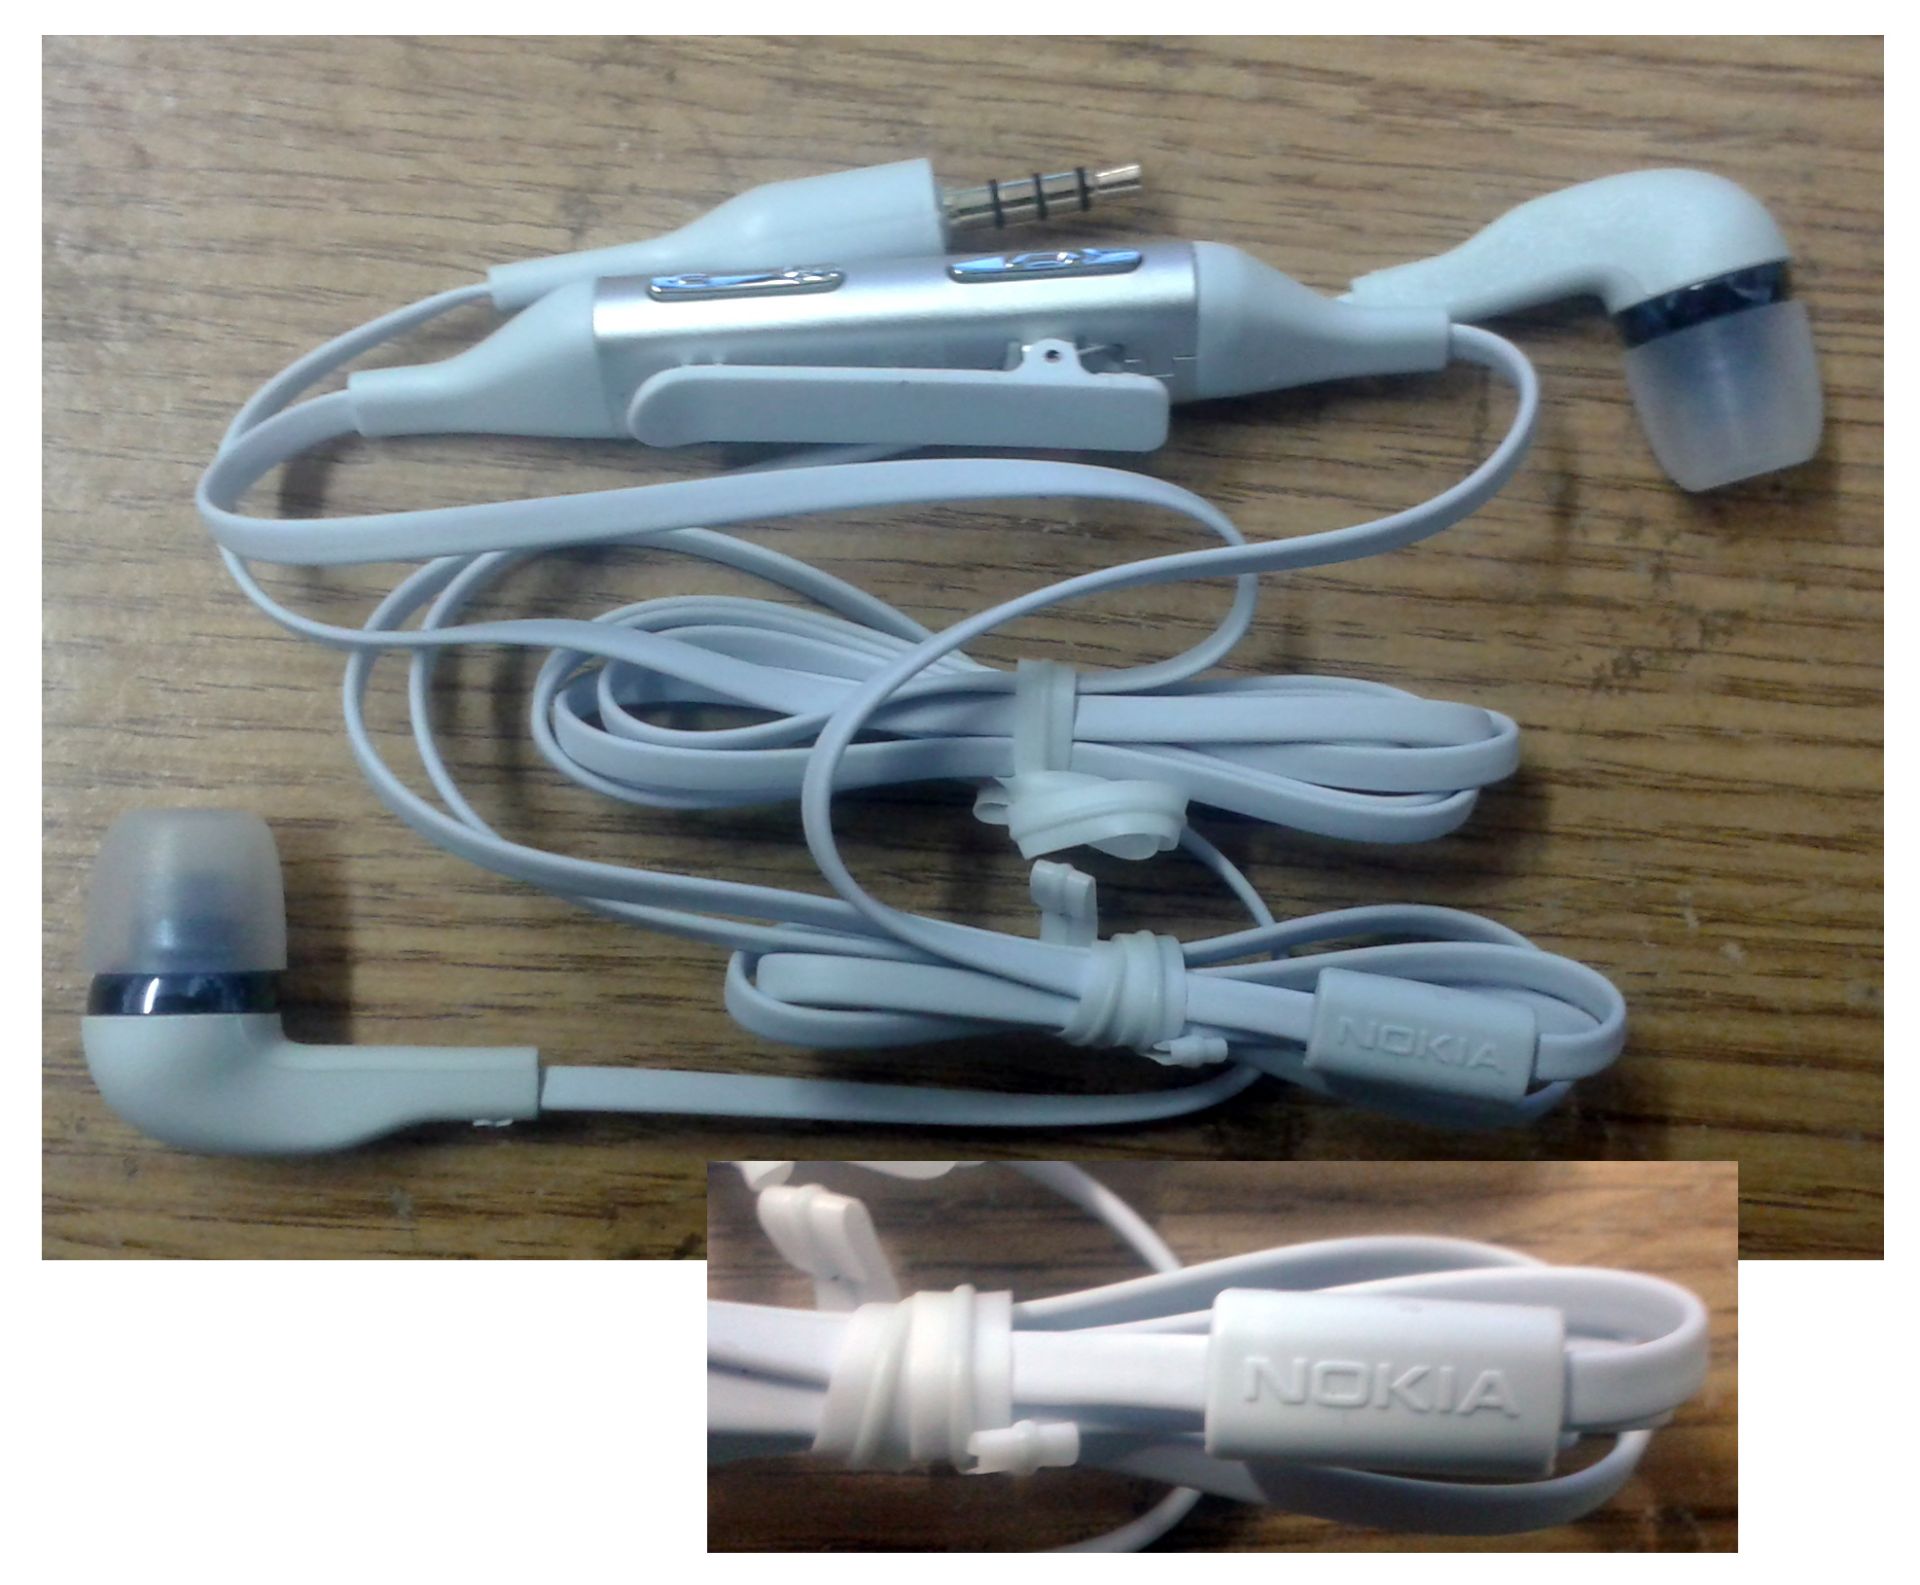 Lot of 200 Units-Nokia WH-701 Wired Stereo Music Headset (White) - Bulk Packed - Image 2 of 2